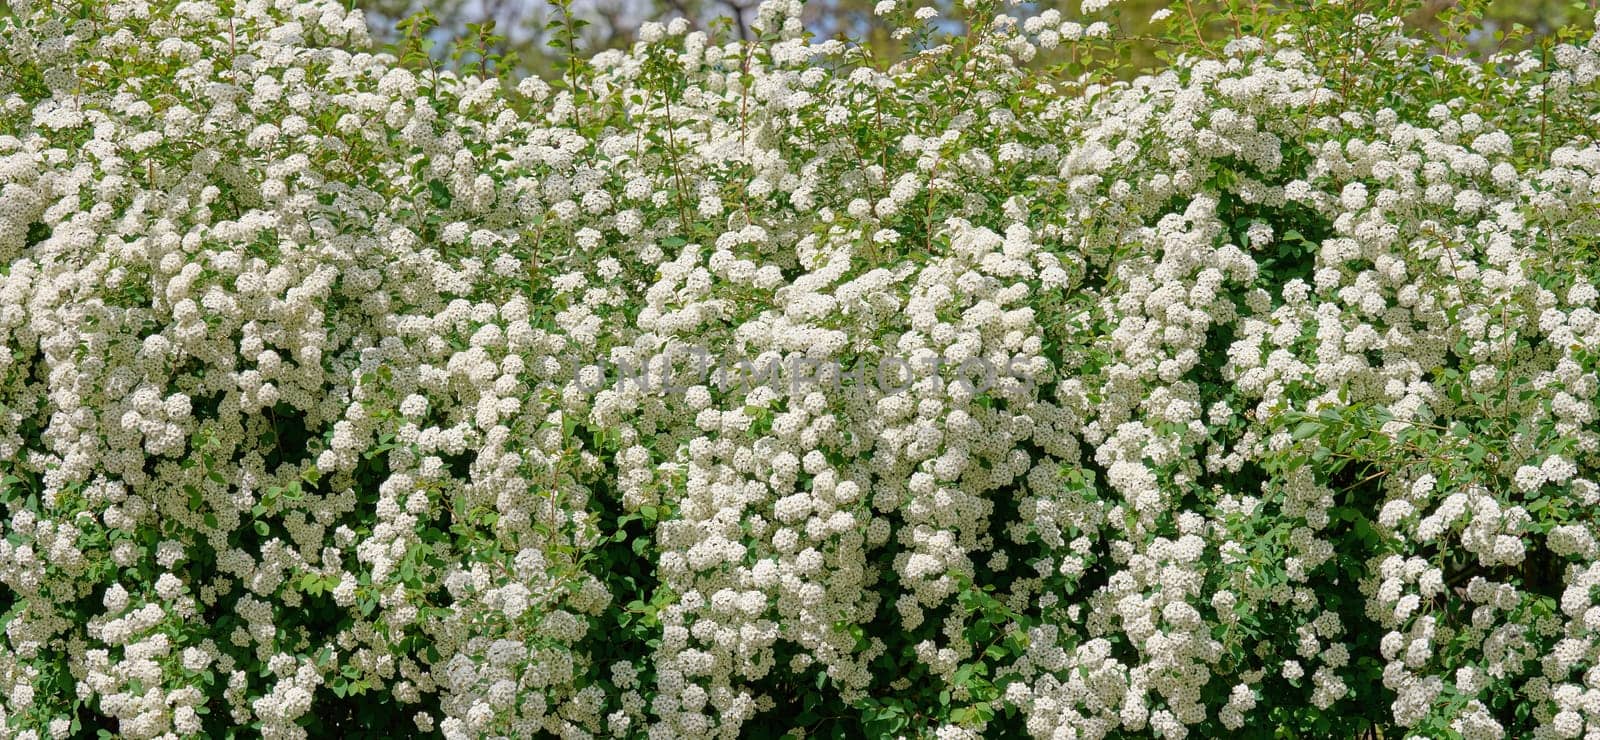 Spirea bushes with white flowers on a spring day